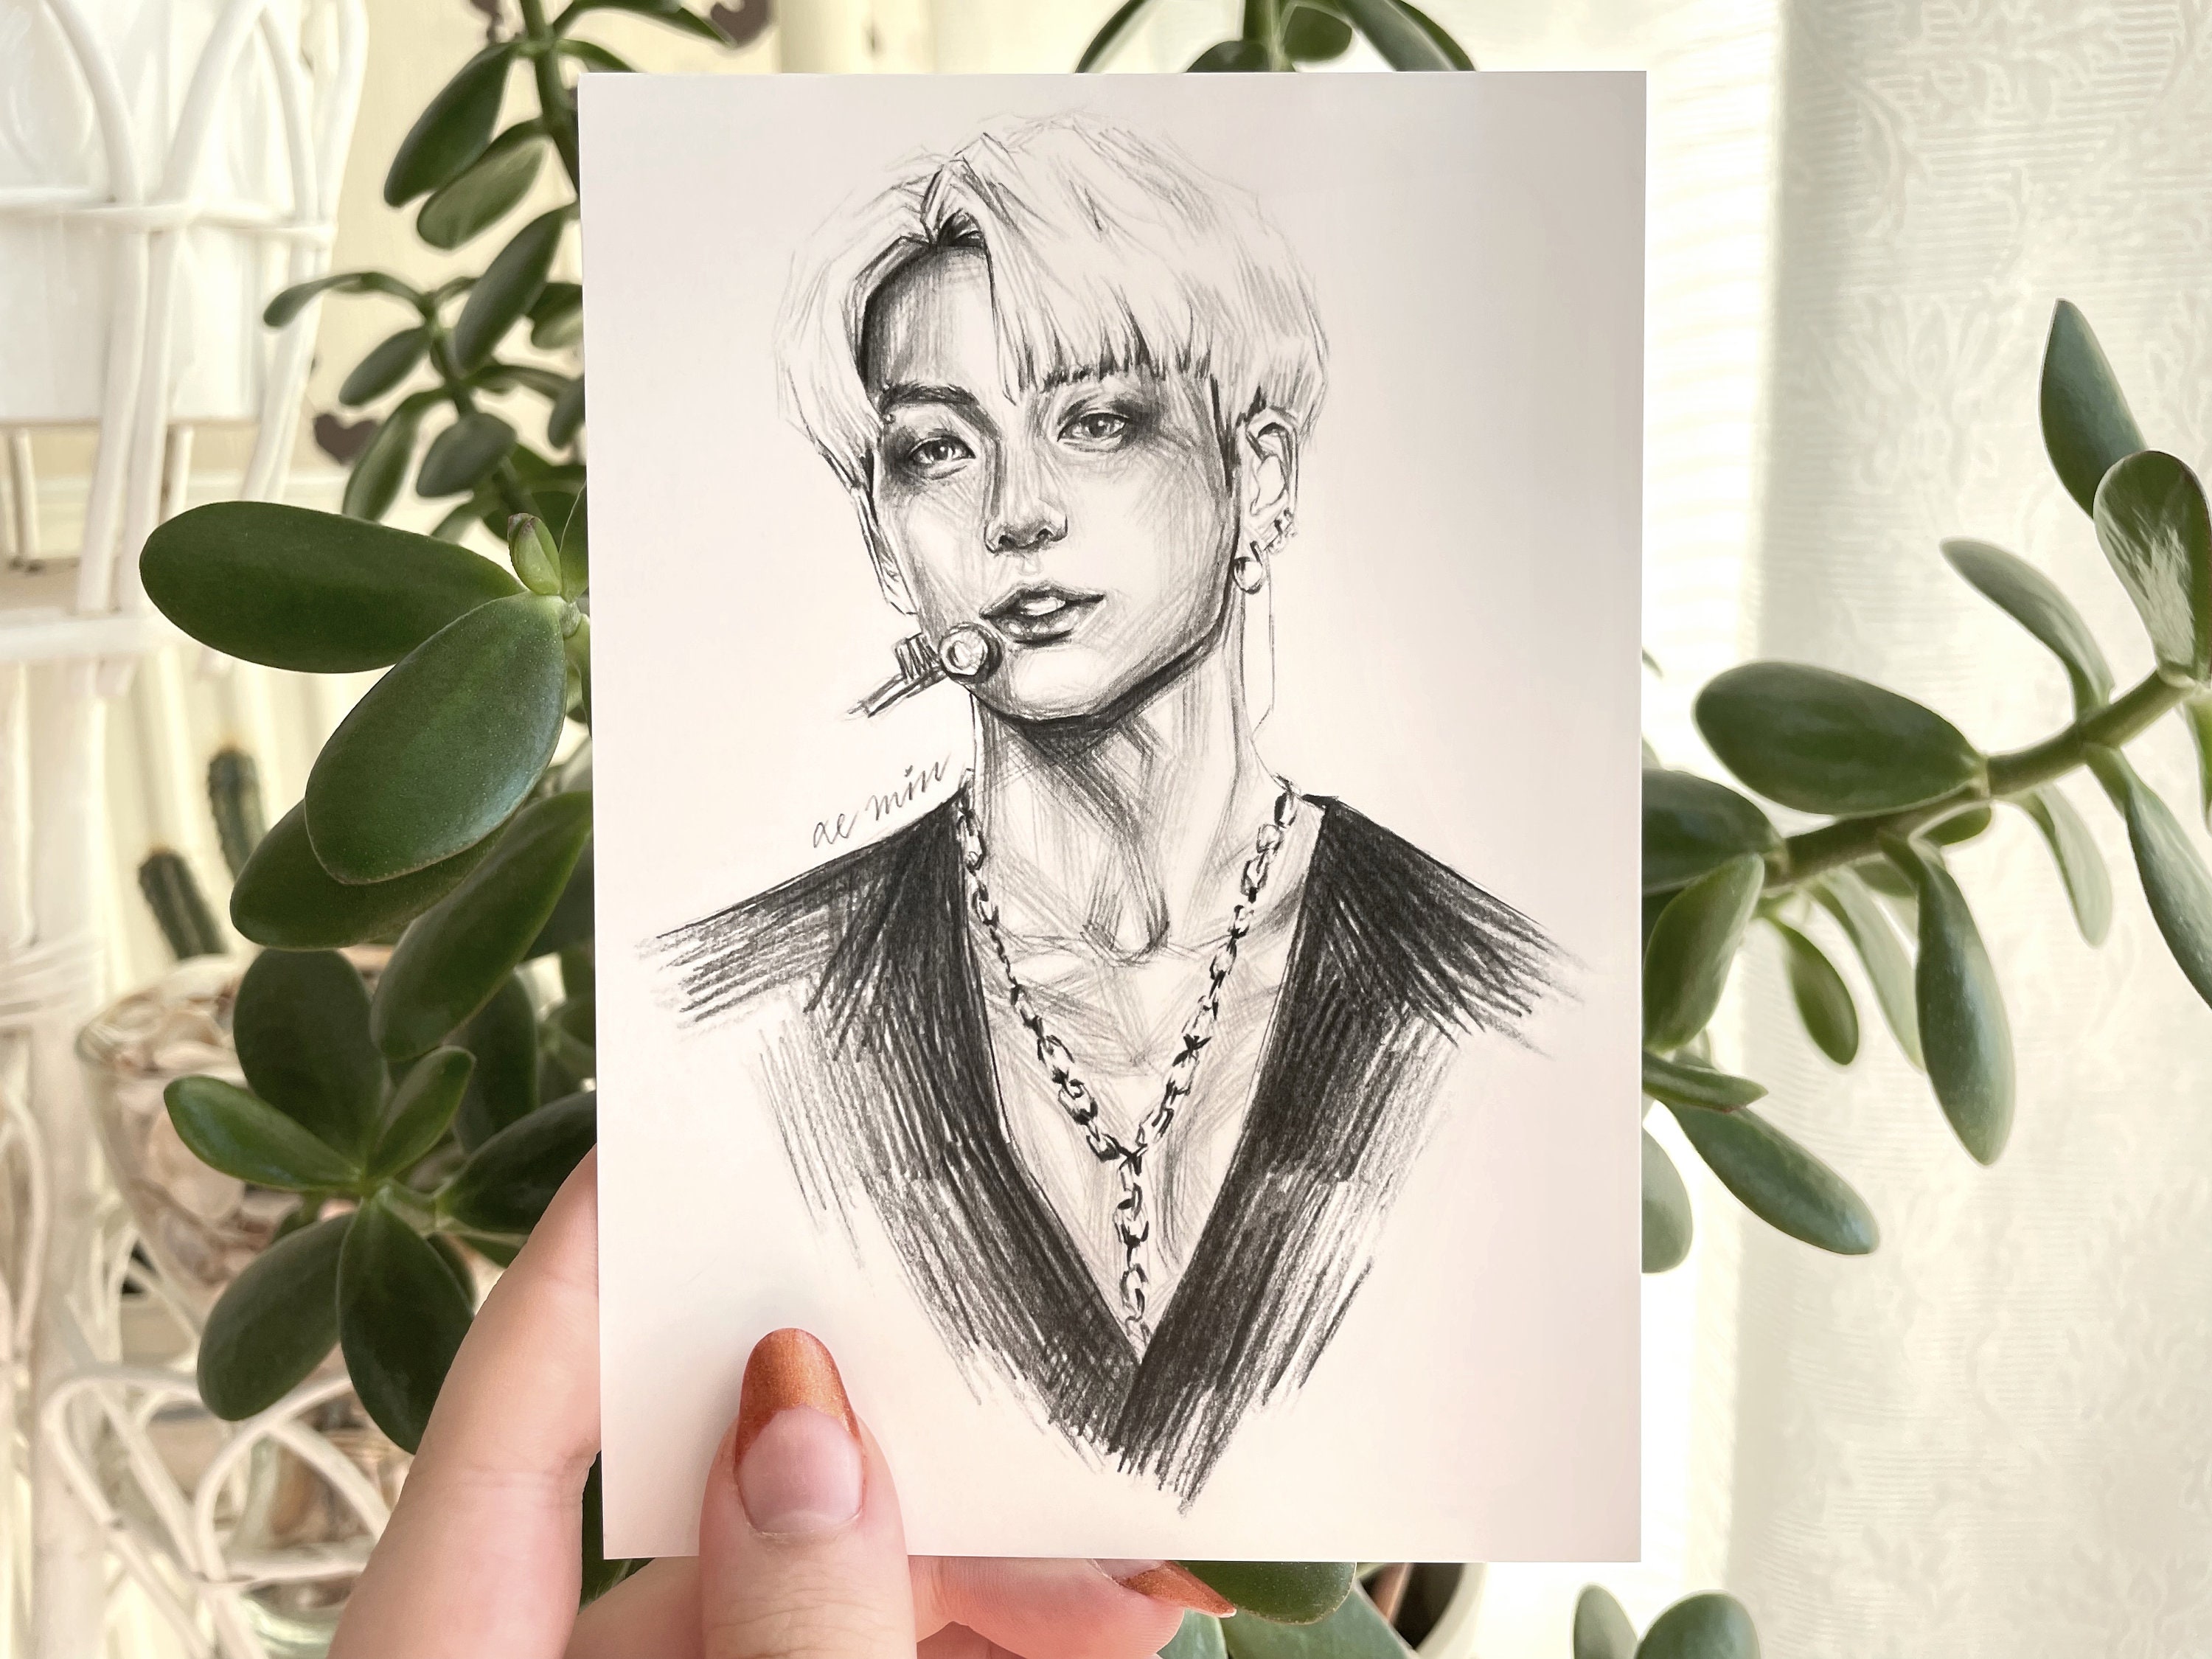 Discover 72+ bts jungkook sketch easy latest - in.eteachers